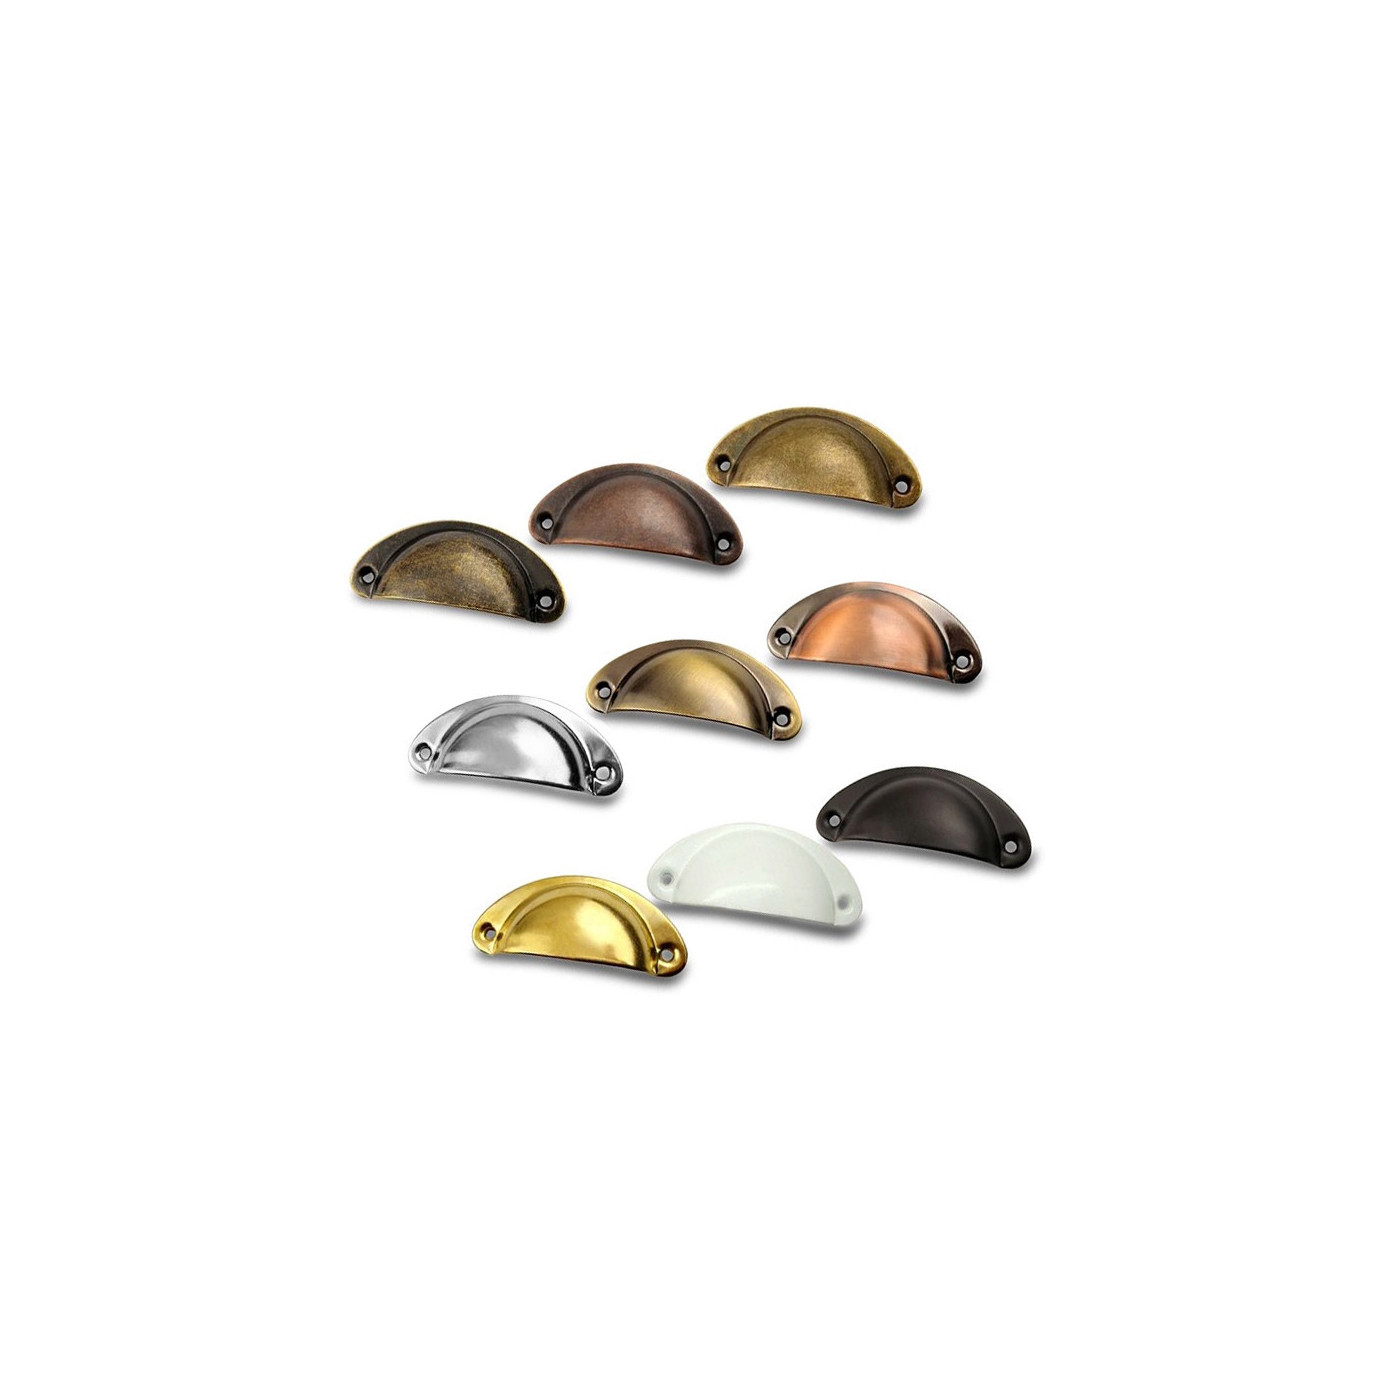 Set of 10 shell shaped handles for furniture: color 6